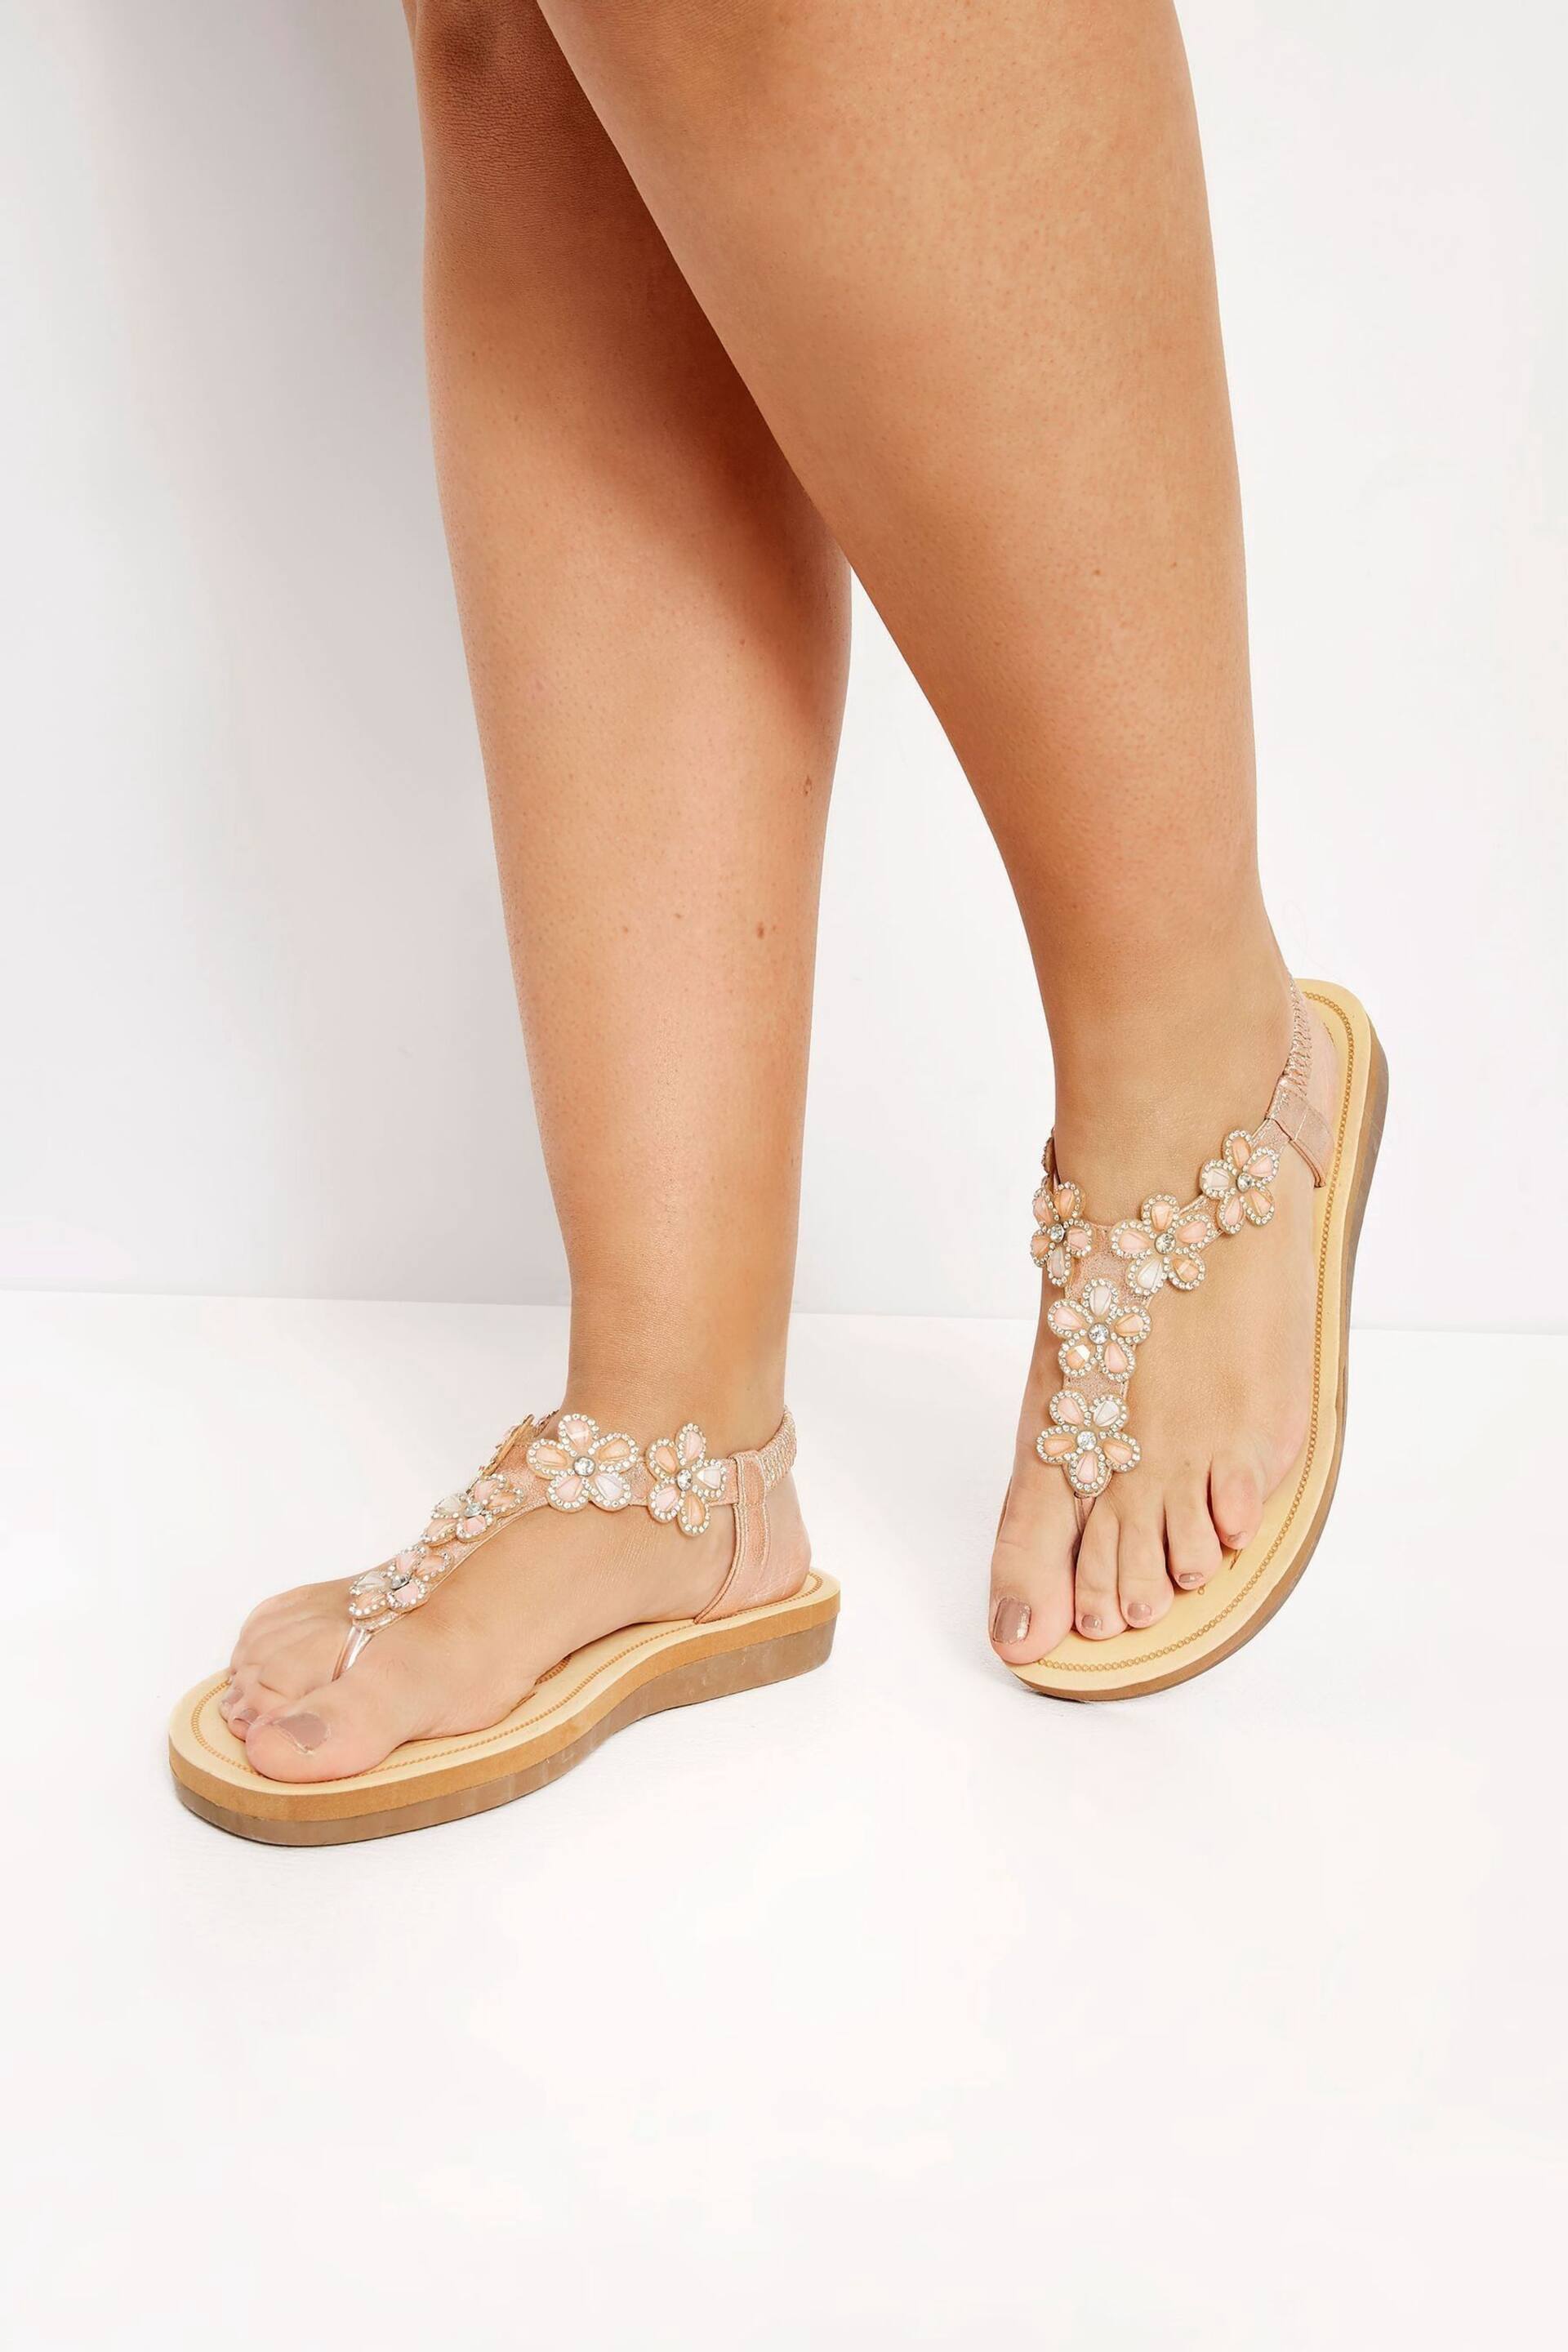 Yours Curve Gold Wide Fit Wide Fit Diamante Flower Sandals - Image 1 of 6